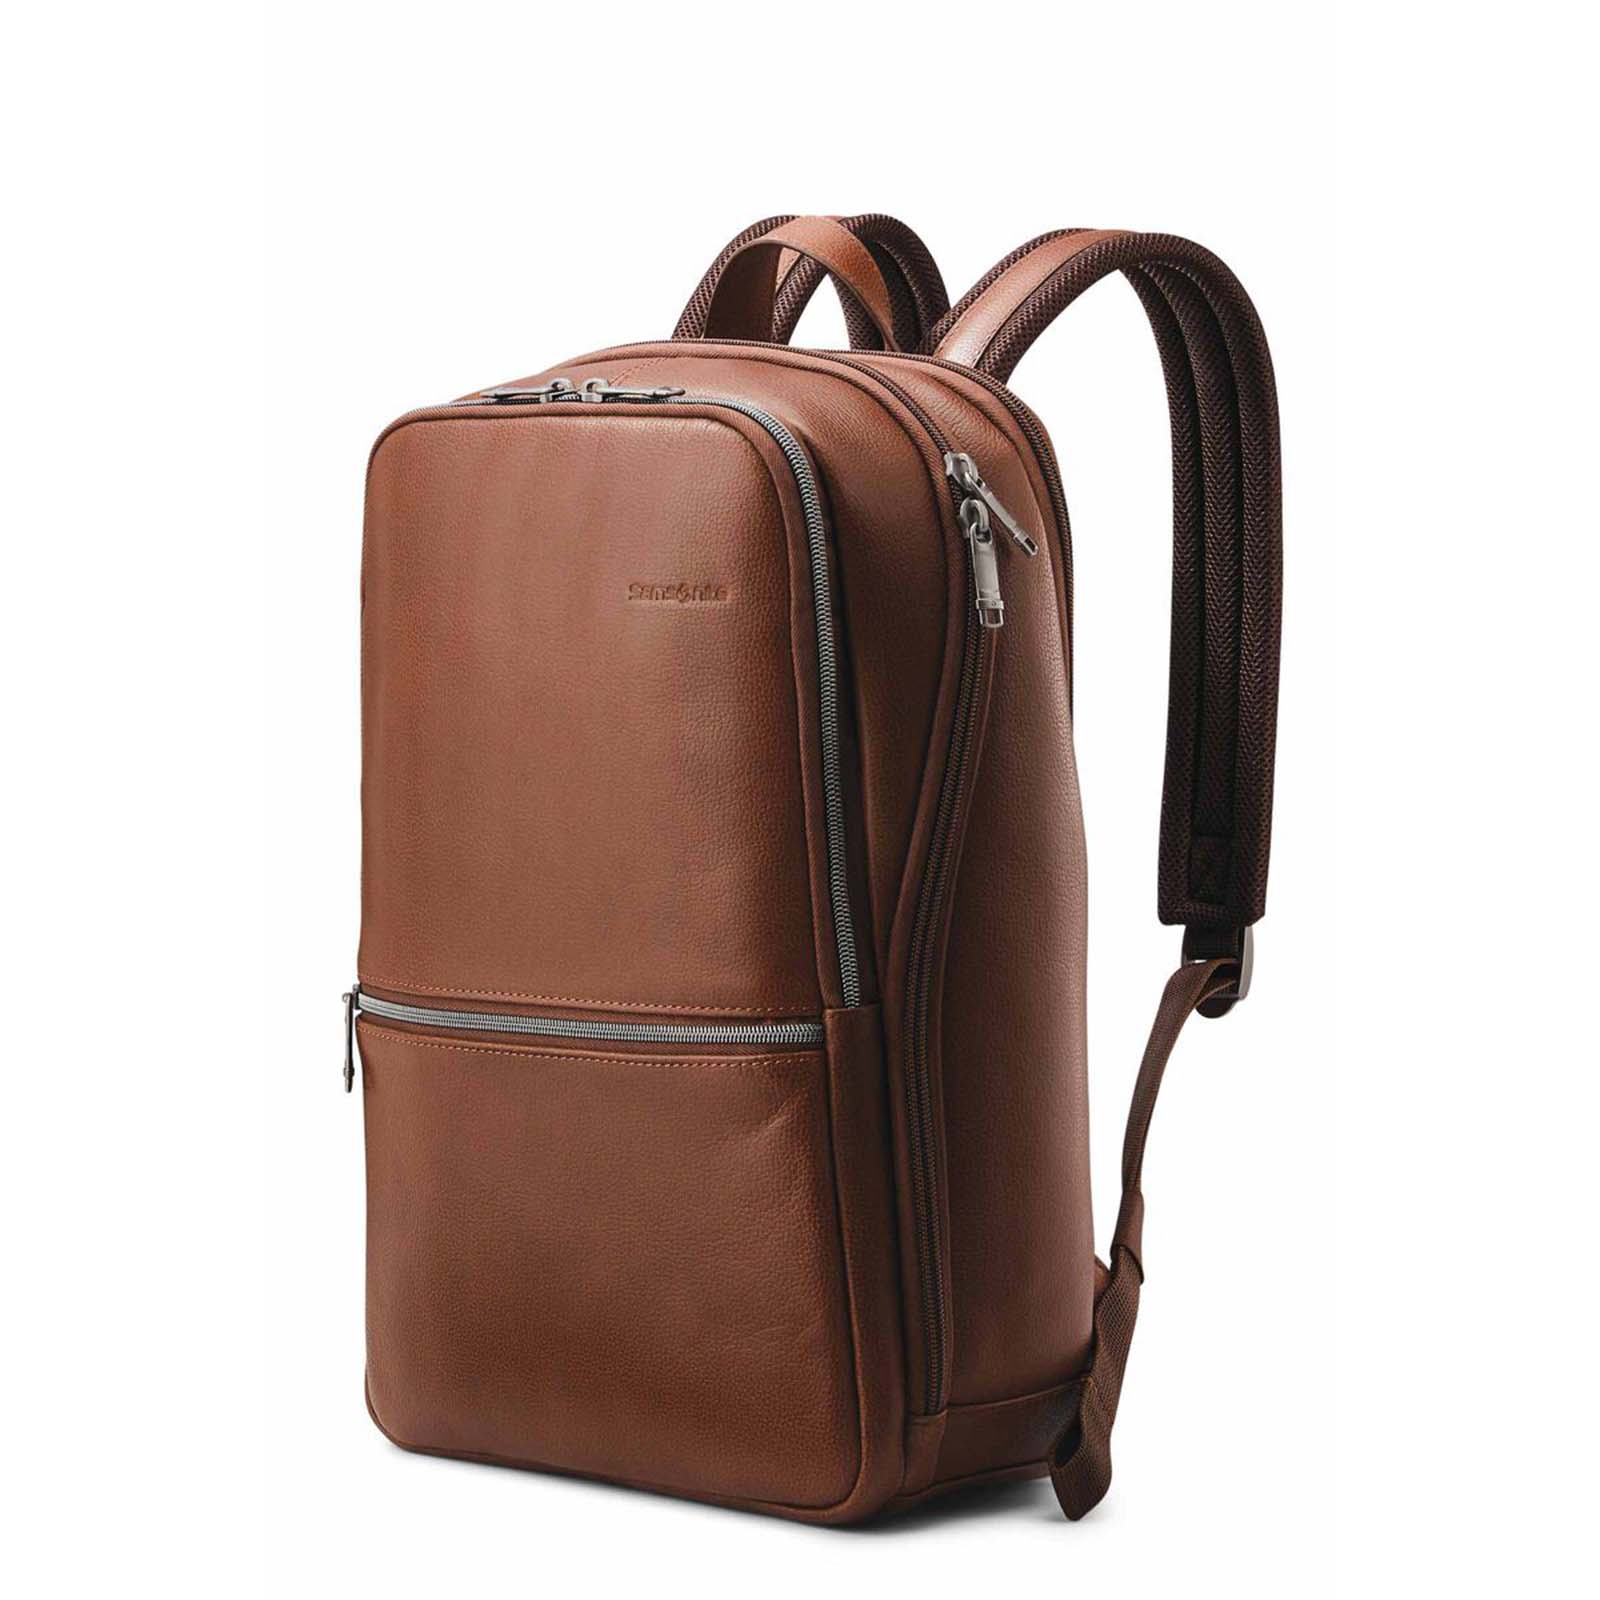 Samsonite-Classic-Leather-14-Inch-Laptop-Backpack-Cognac-Front-Angle